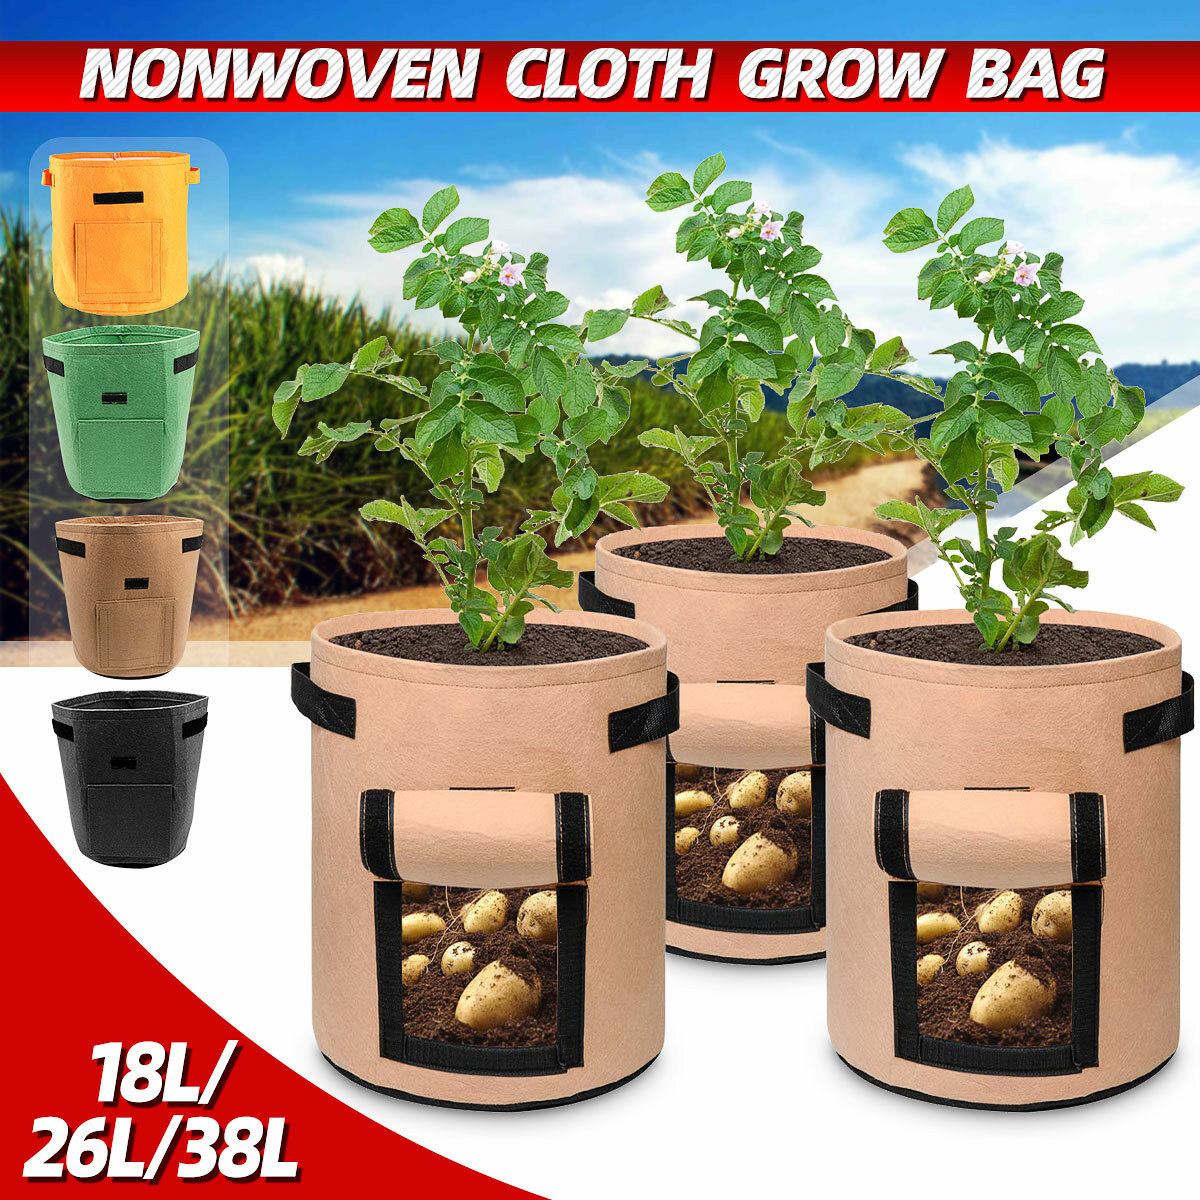 Momoco Plant Grow Bags 3 Pack 7Gallon Gardening Plant Containers Bags,Breathable Nonwovens Fabric Plant Pots with Handles,Grow Bags for Plants//Garden Planter Bags//Potato Grow Bags